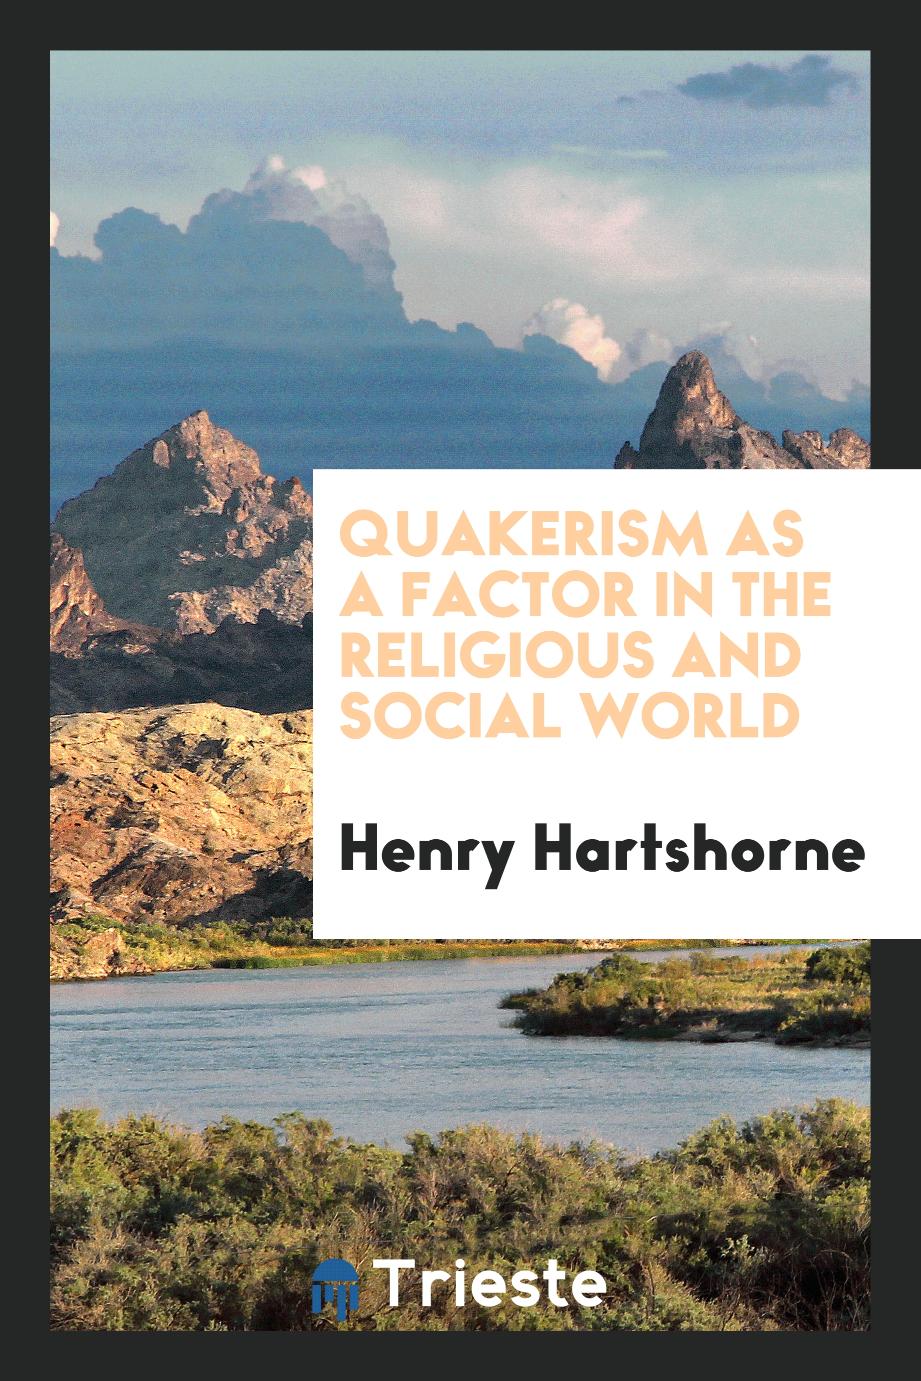 Quakerism as a Factor in the Religious and Social World